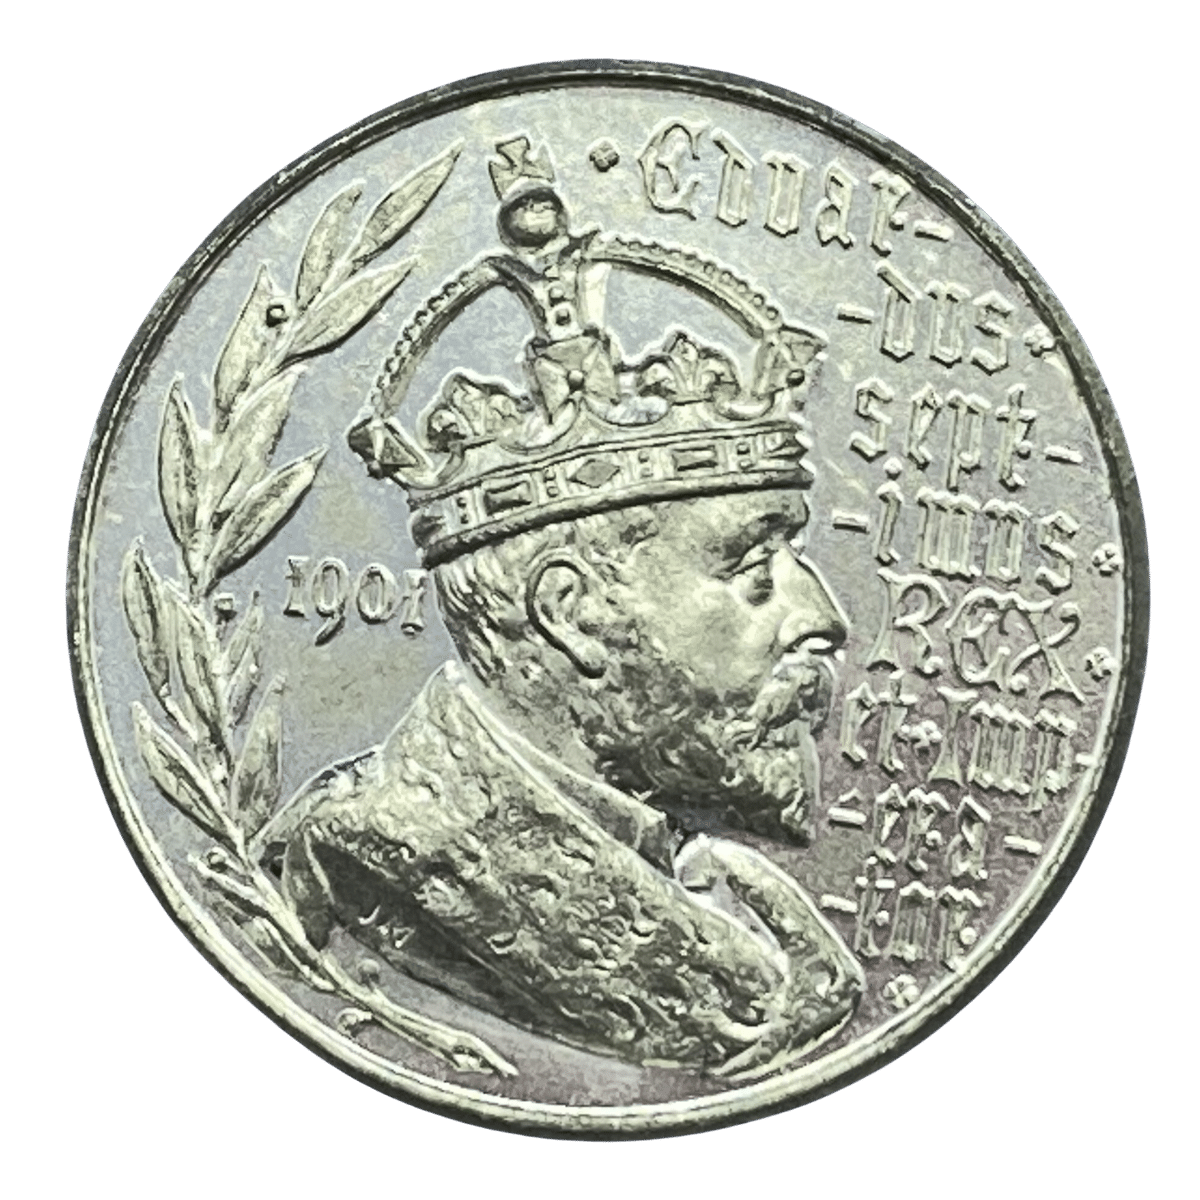 1901 Edward VII Accession Historical Medal by Anon